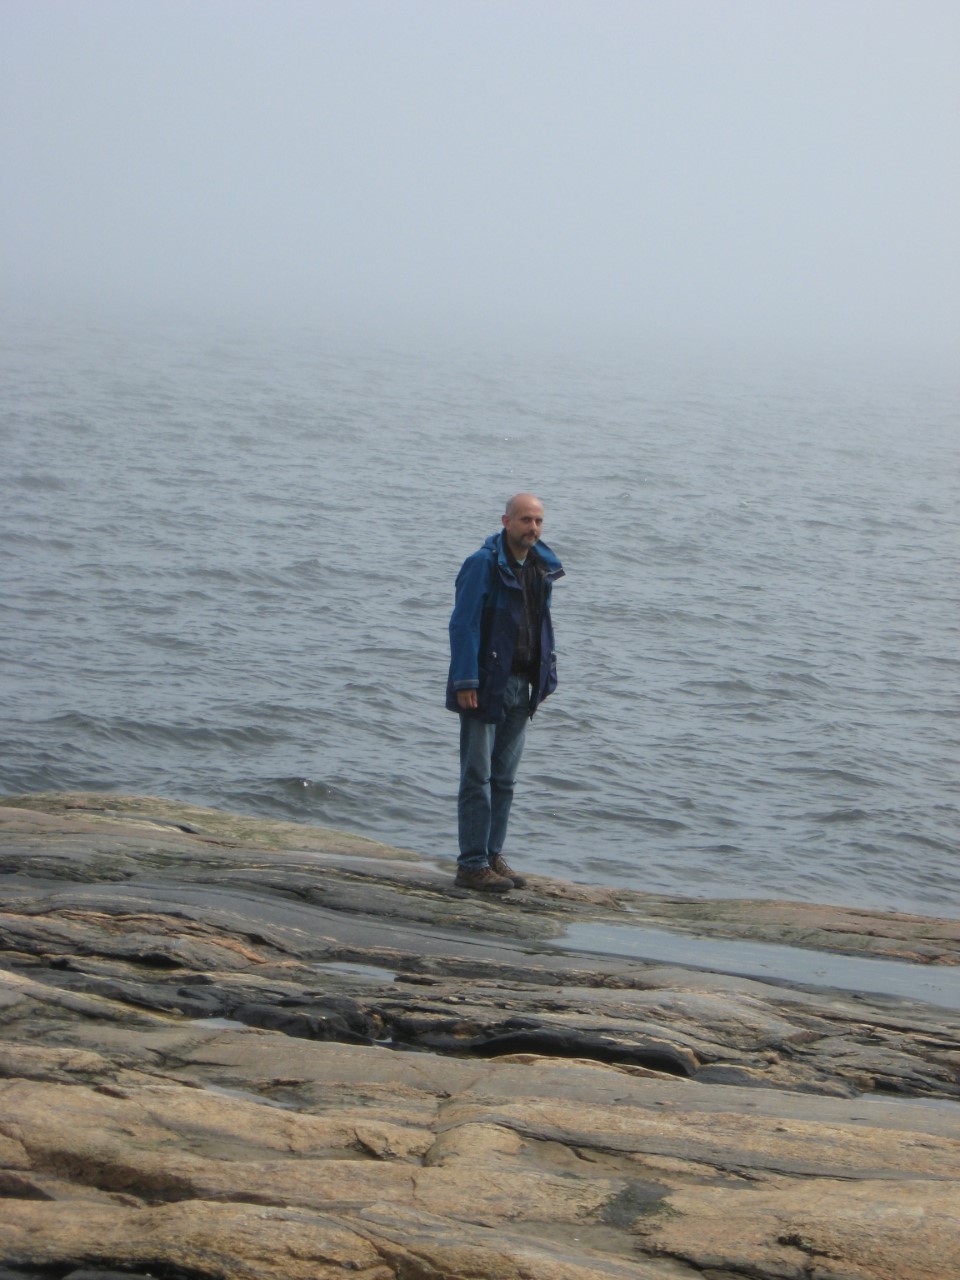 Aziz Choudry stands on a rocky beach with a large body of water behind him. He wears a dark blue rain coat and blue jeans.